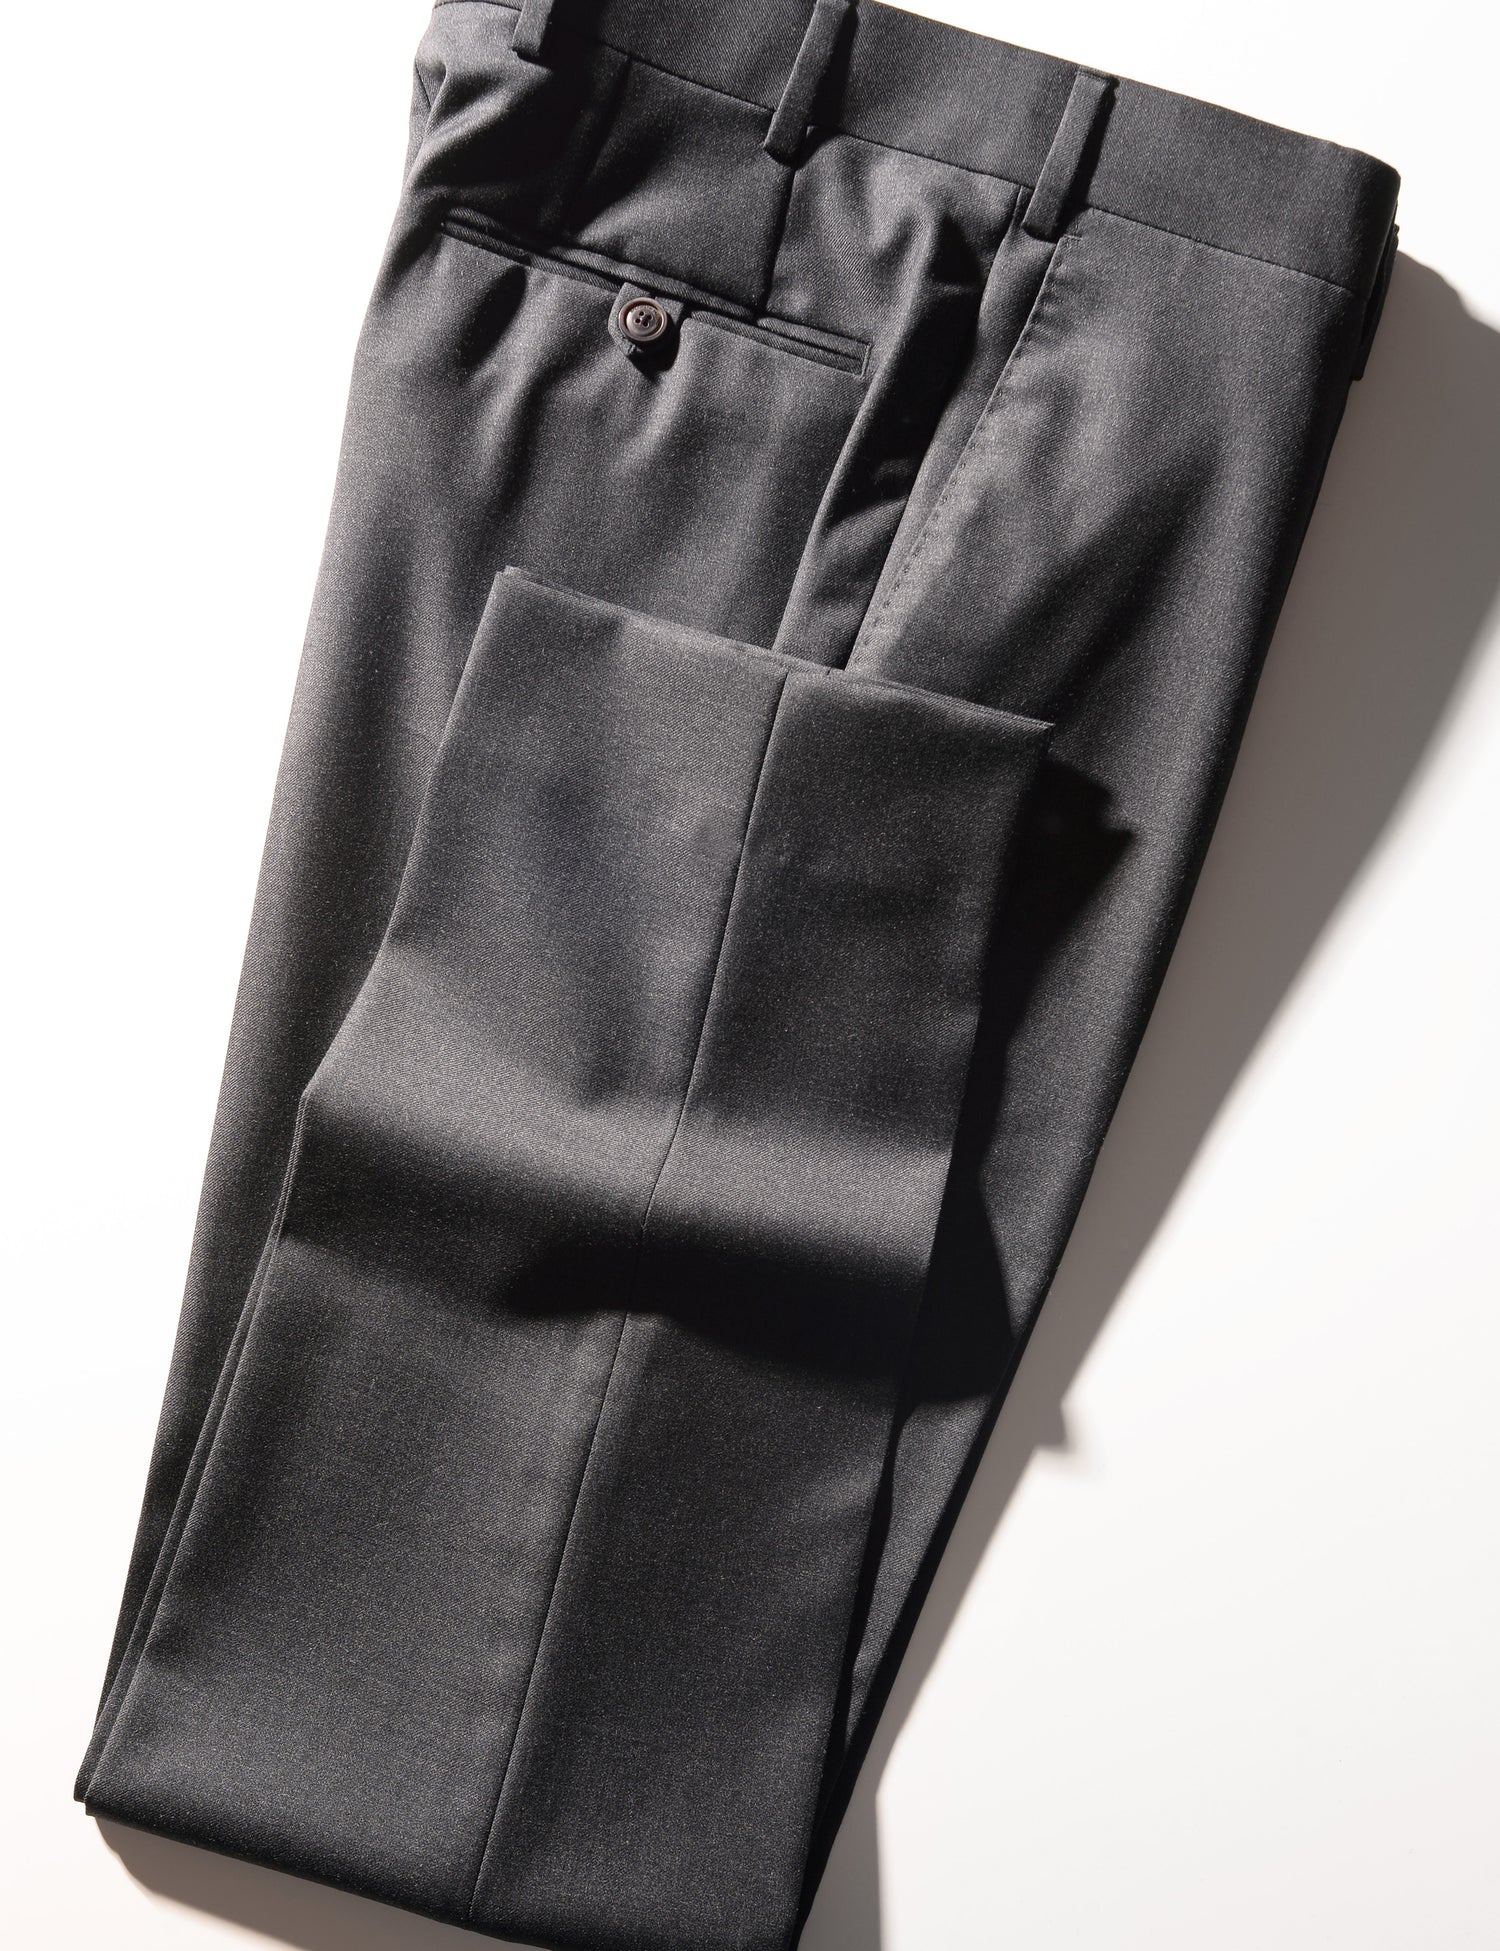 Detail shot of Brooklyn Tailors BKT50 Tailored Trouser in Super 110s Twill - Charcoal folded to show cuff, back pocket, side pocket, and waistband